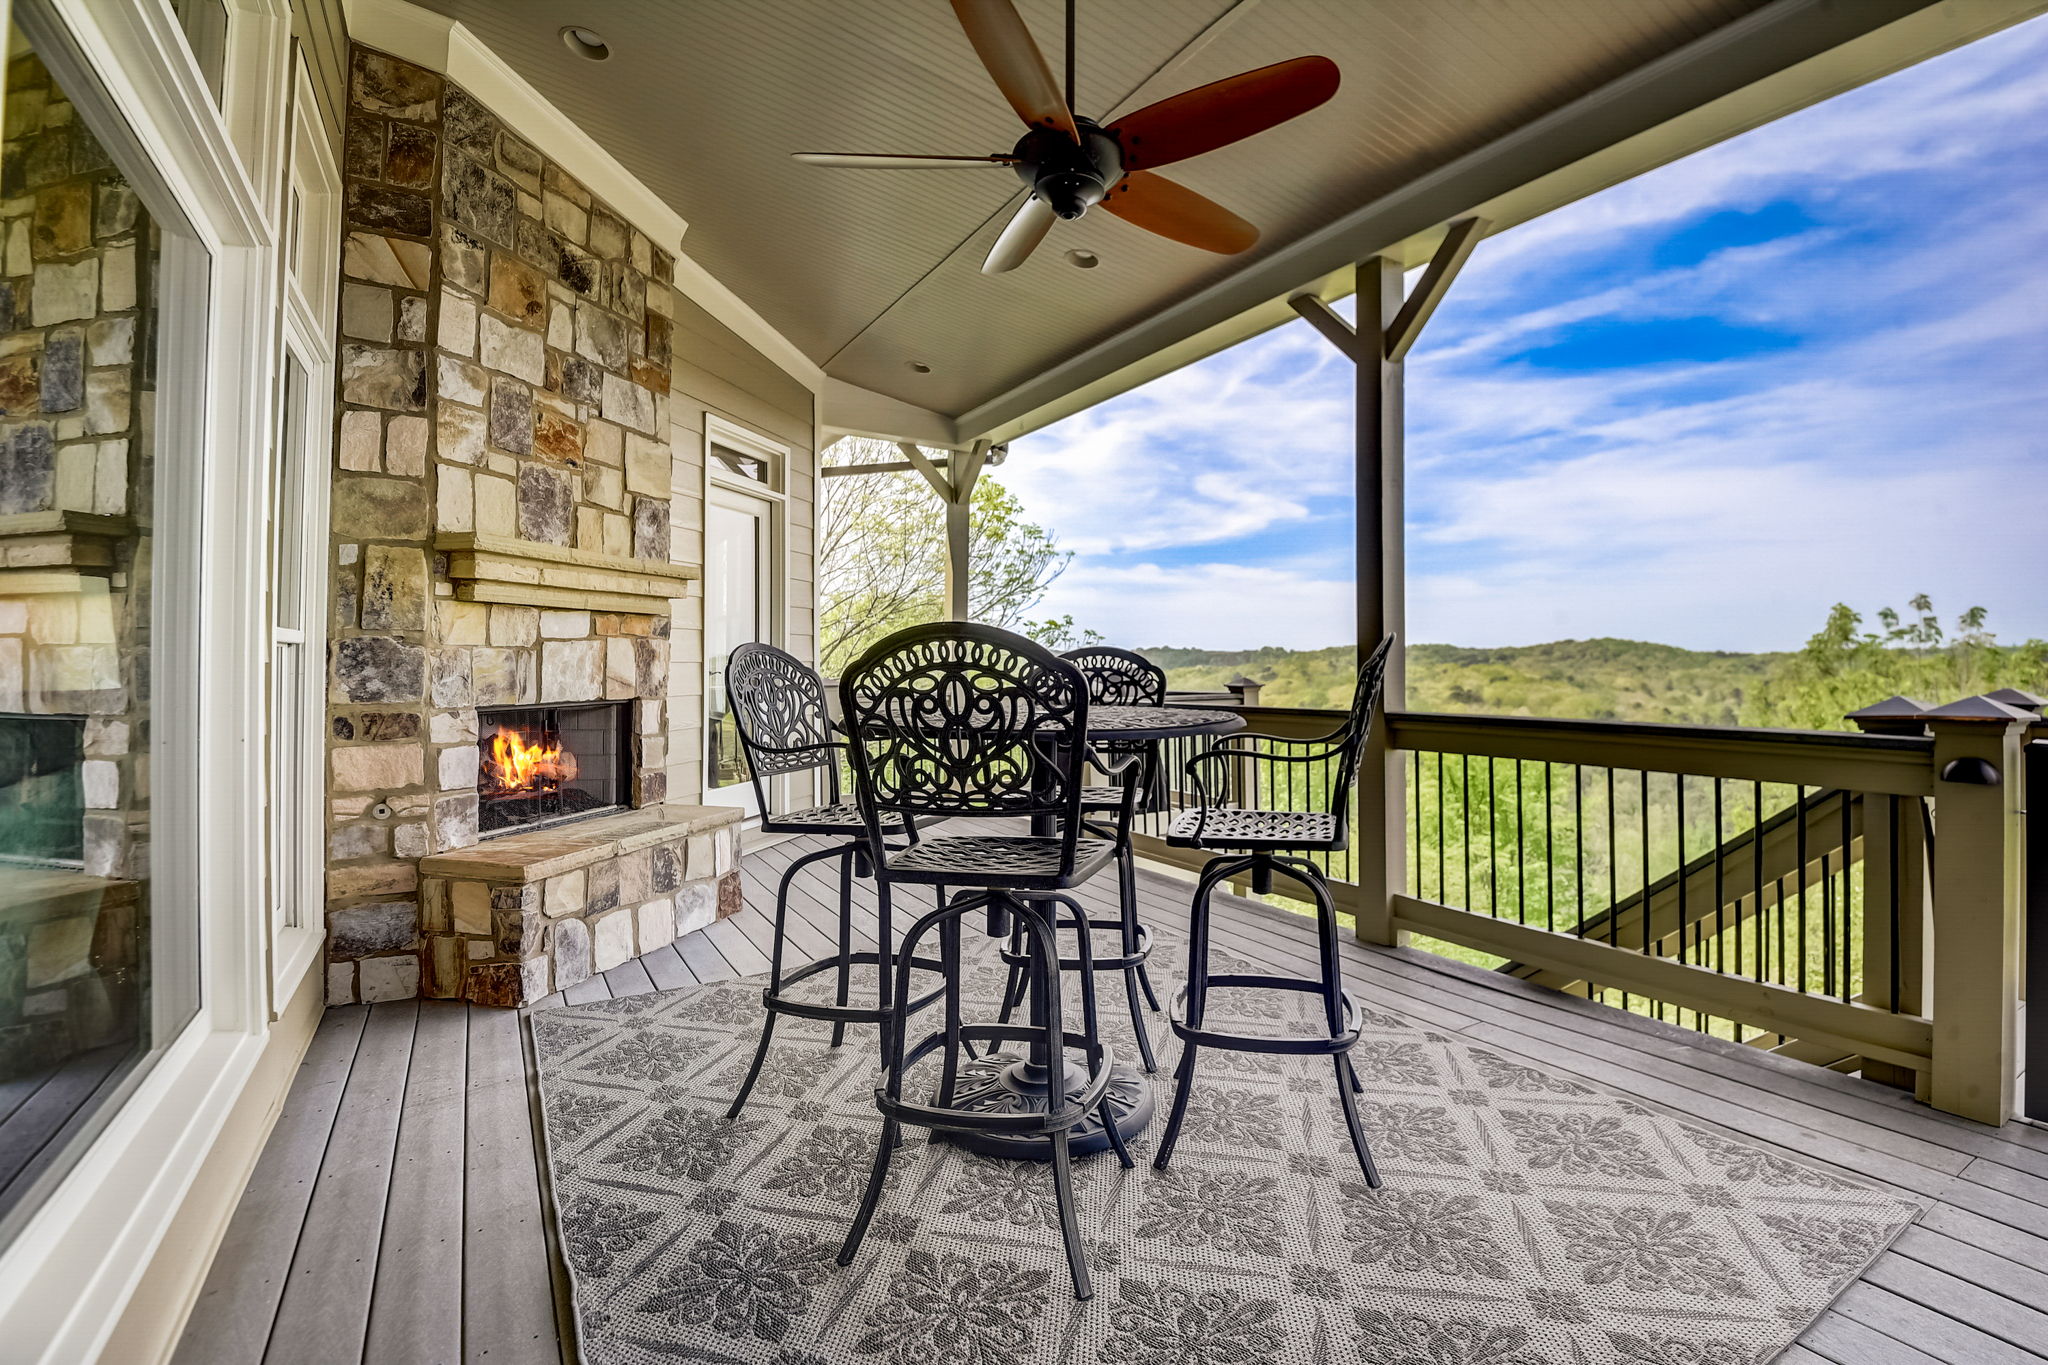 Enjoy those Cool Evenings Next to the Fire on Your Covered Patio!